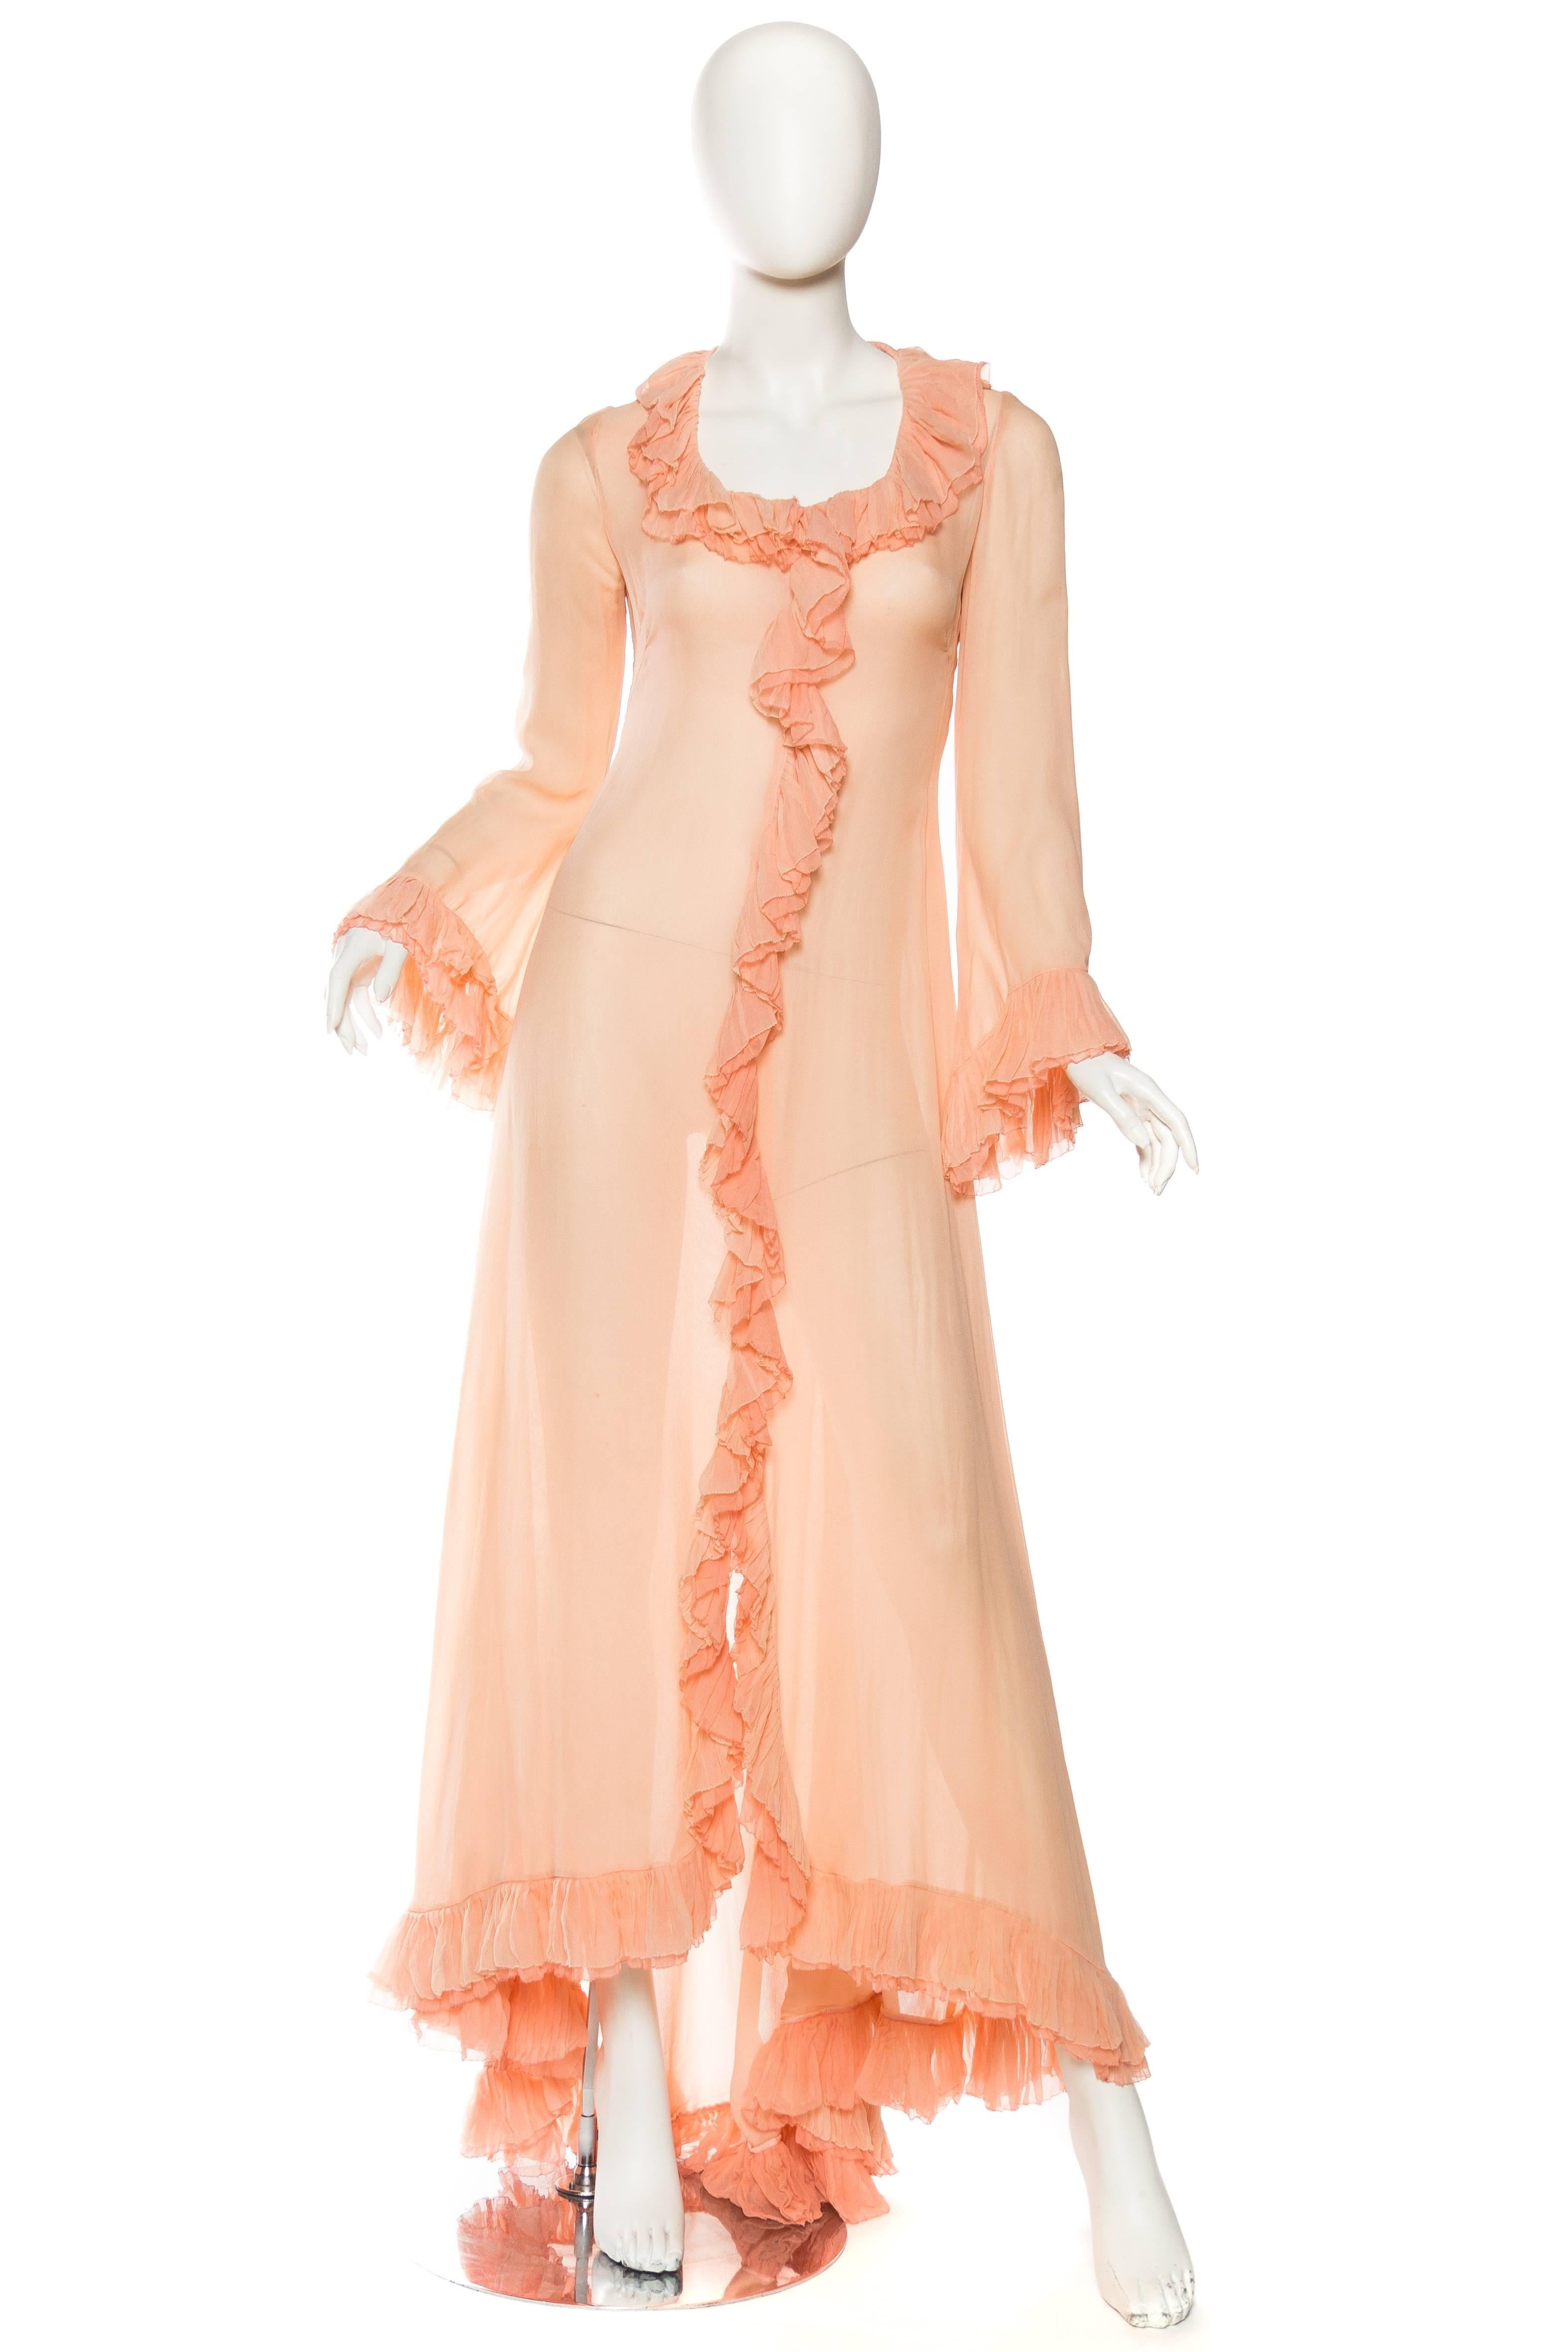 Negligee has a very soft and luxurious feel to the silk chiffon with a train and double ruffled cuffs. Can be worn as a dress also with a slip. 